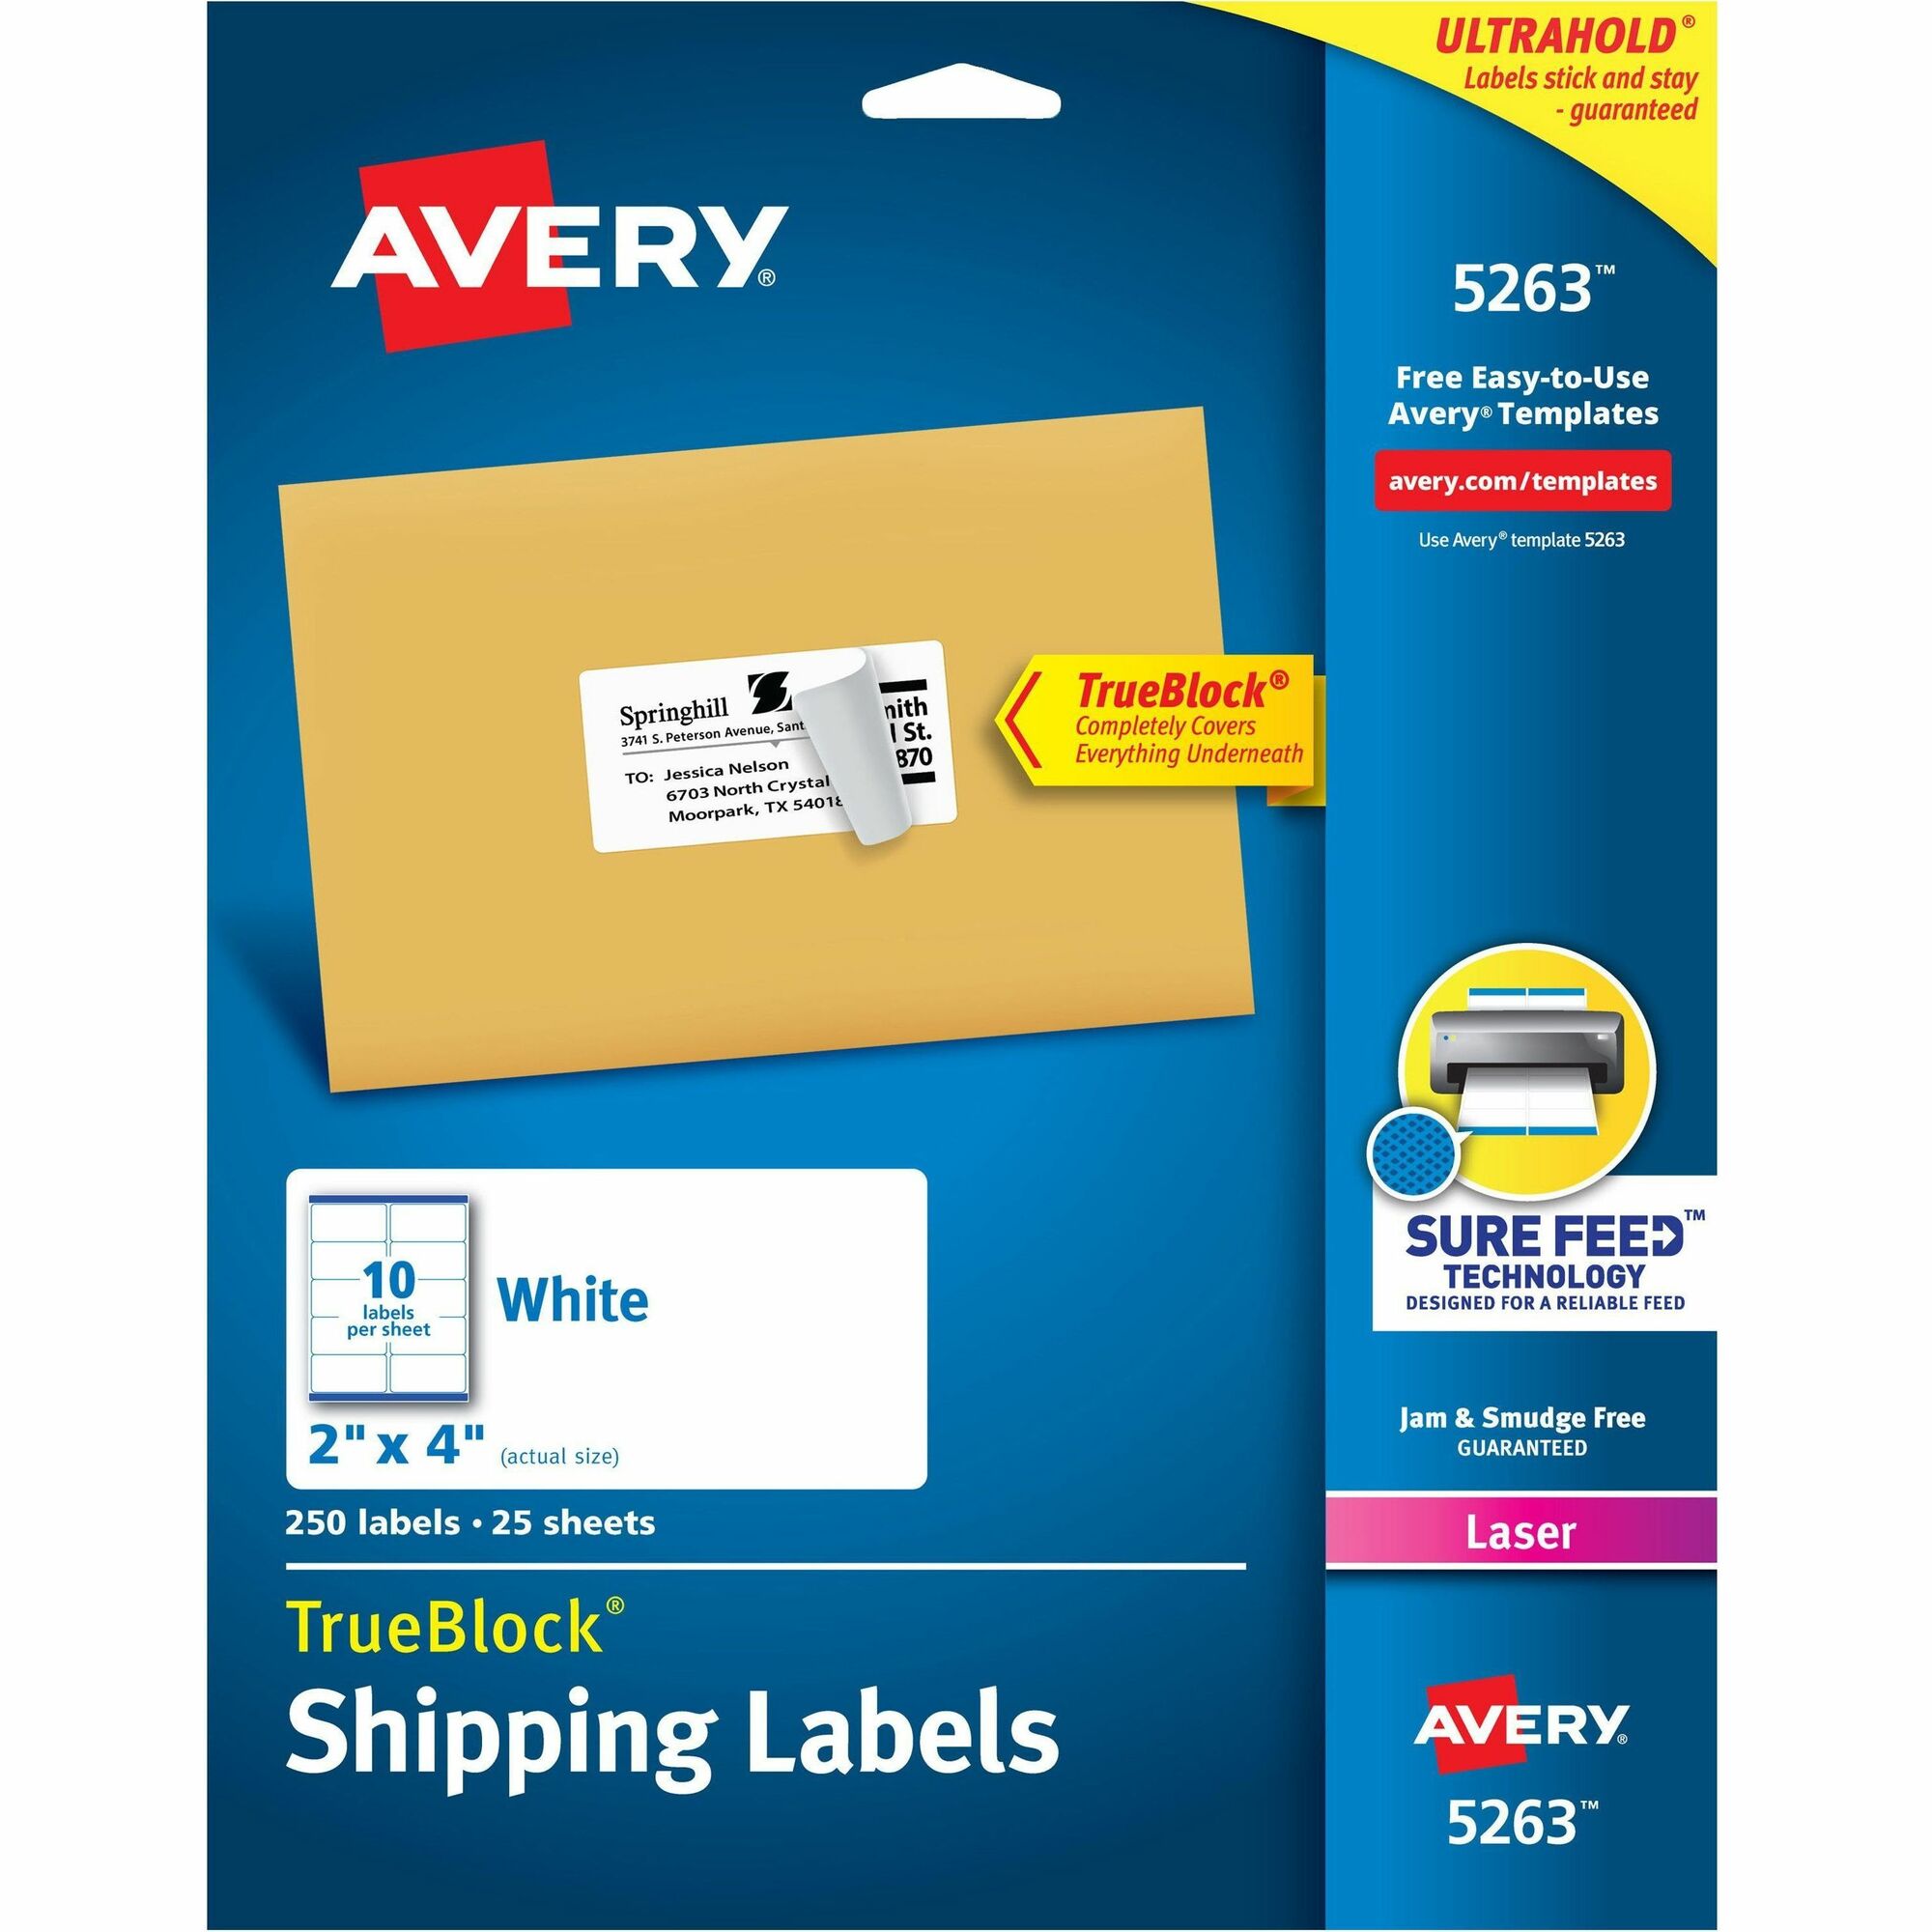 33-avery-5263-label-template-labels-database-2020